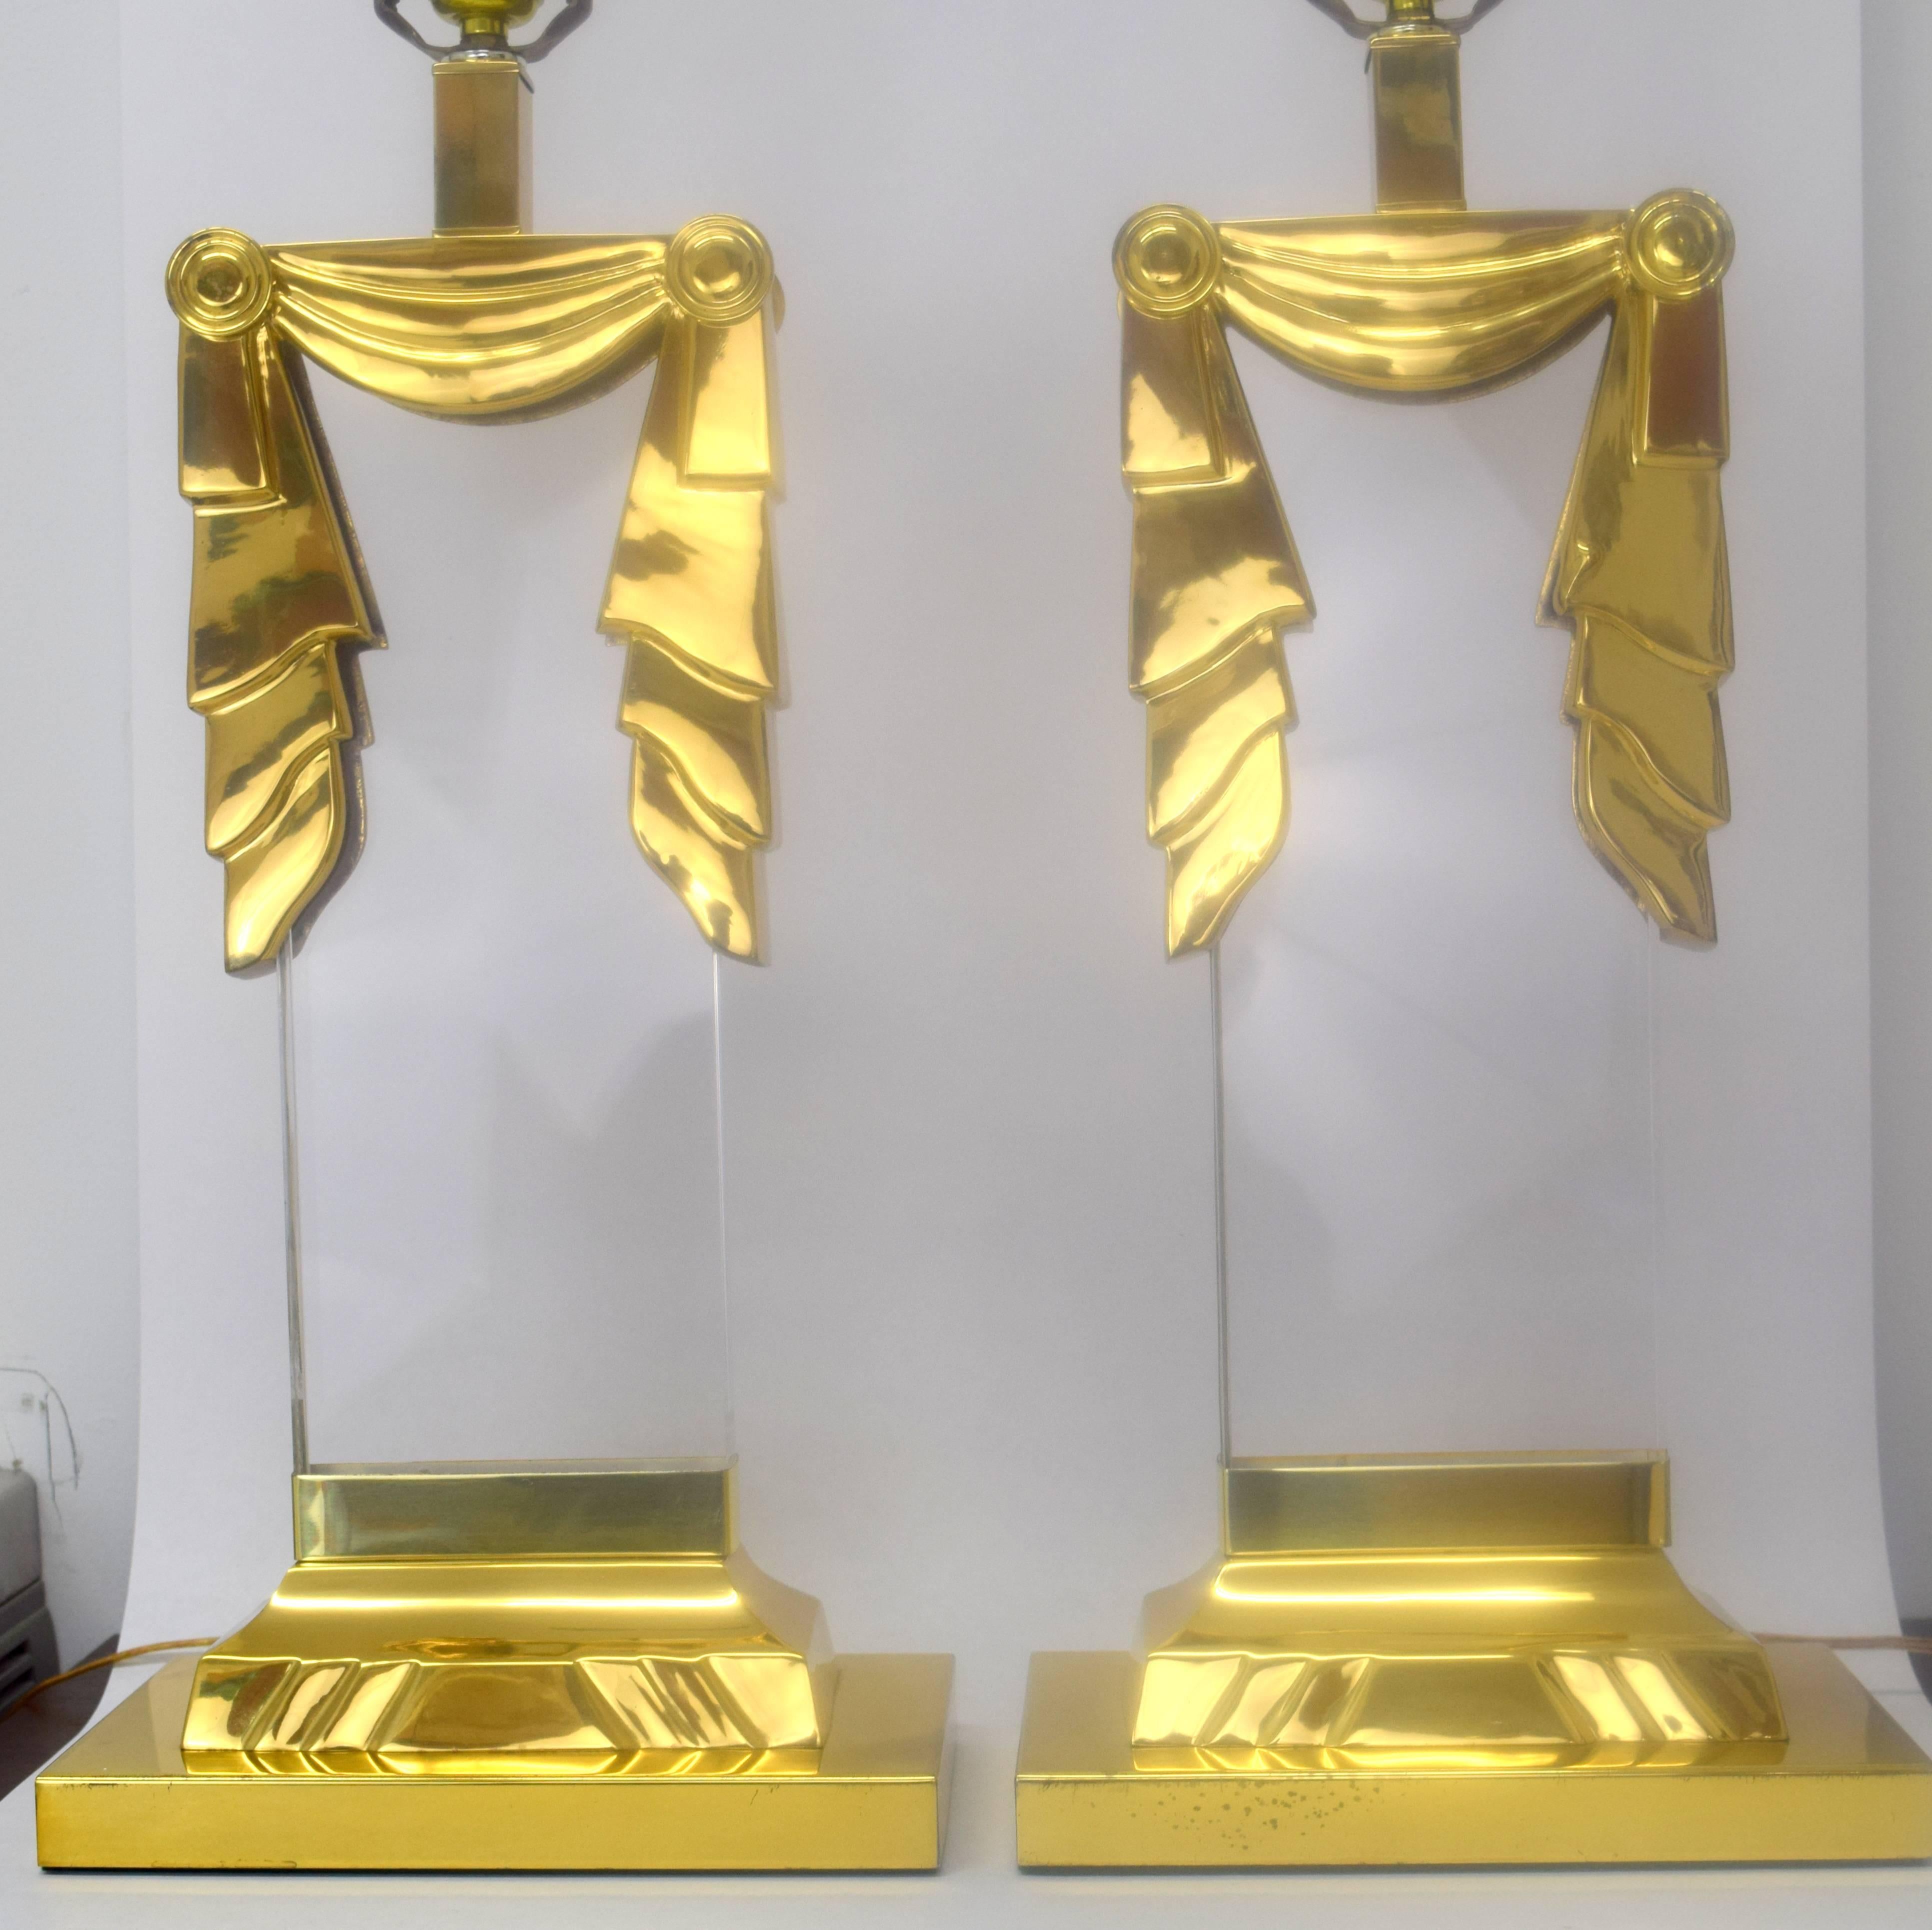 Fantastic pair of lucite and brass lamps in square column style with swag motif. Polished brass with minor patina and wear, lucite clear and free. Electrical cord enters base then travels up side inset in lucite. Shown with vintage shades, not